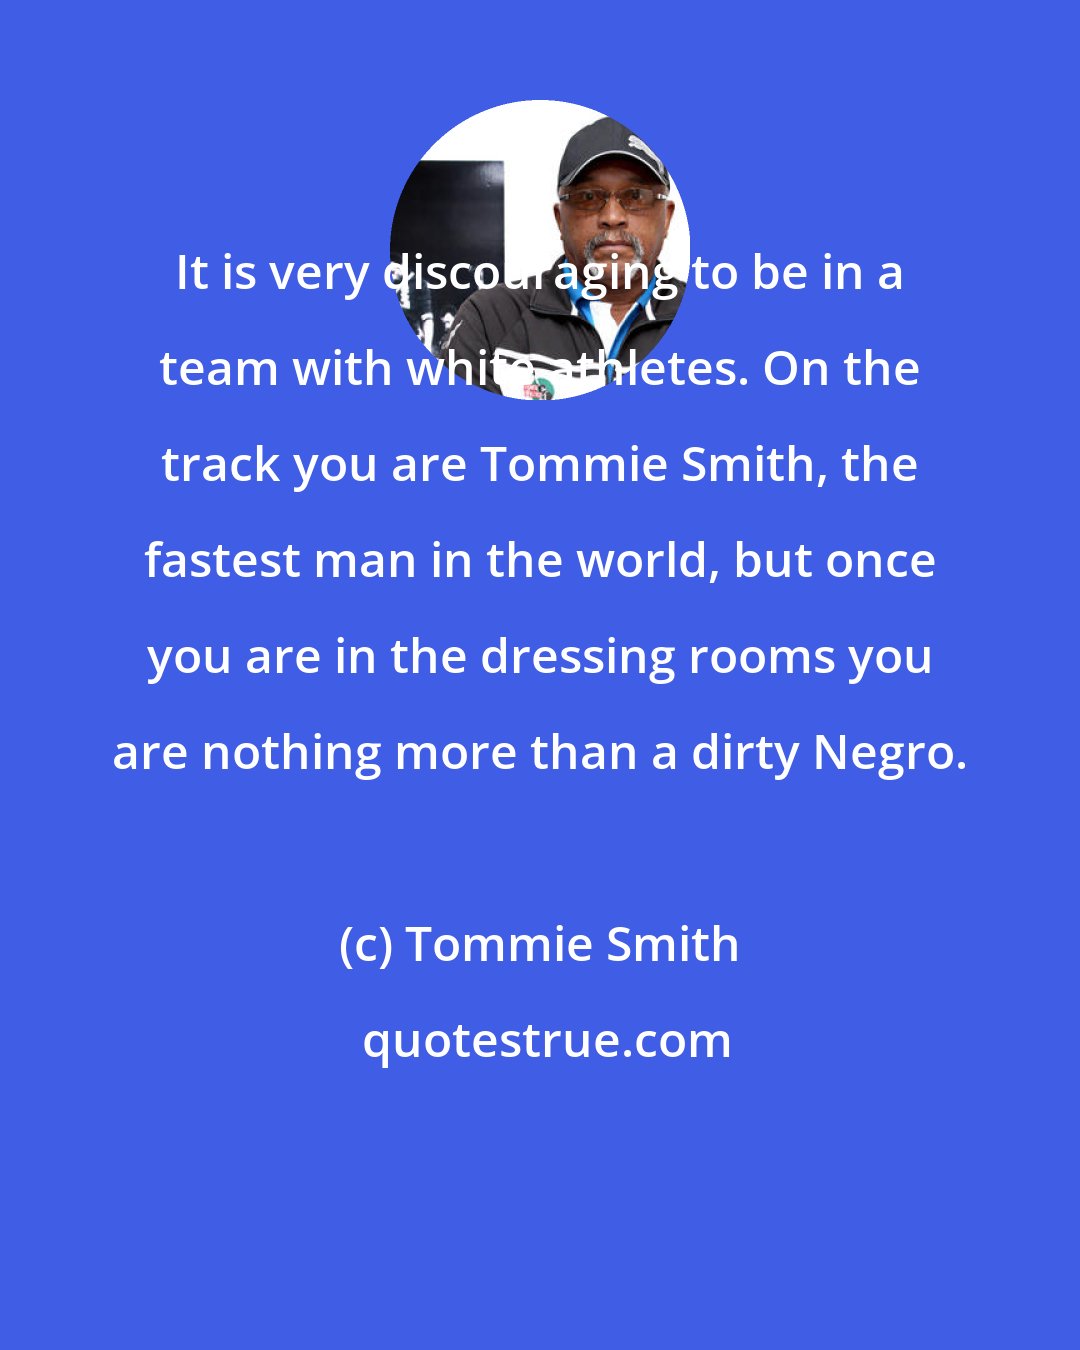 Tommie Smith: It is very discouraging to be in a team with white athletes. On the track you are Tommie Smith, the fastest man in the world, but once you are in the dressing rooms you are nothing more than a dirty Negro.